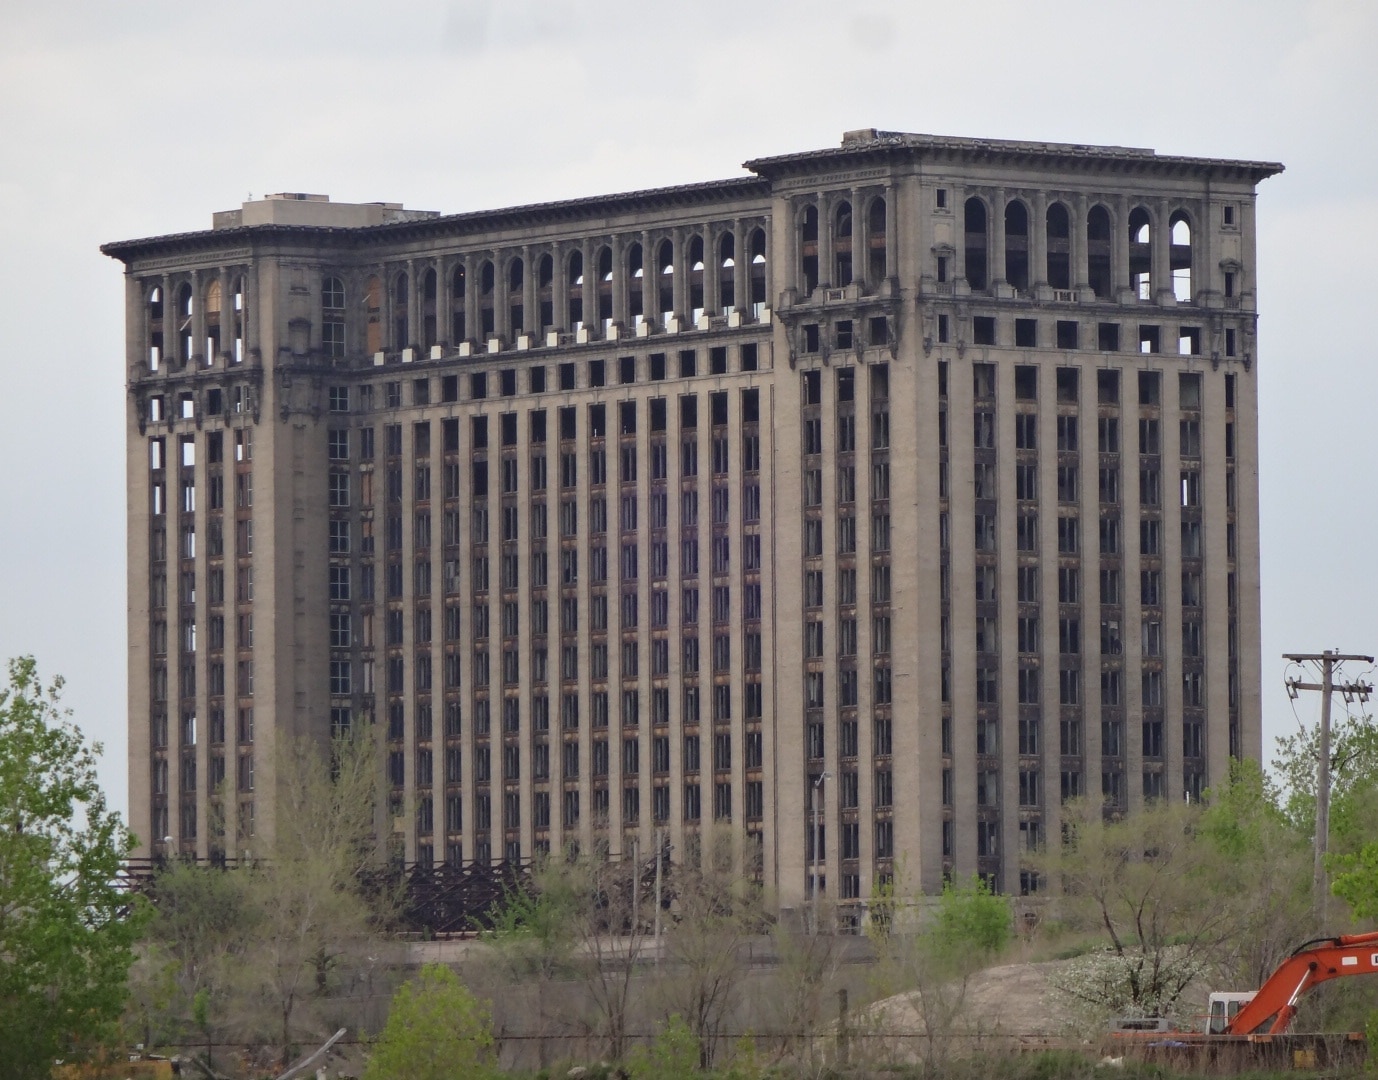 The view from the patio of Green Dot Stables is of the backside of the currently abandoned and forever in some state of rehabilitation, Michigan Central Station.

The station opened in 1913 and remained operational until 1988. At the time of its construction, it was the tallest rail station in the world.

A personal connection to this building would be that my father shipped out from this station to Marine boot camp after being drafted in the Korean War.

A return trip for more photos and further exploration is definitely on the horizon.